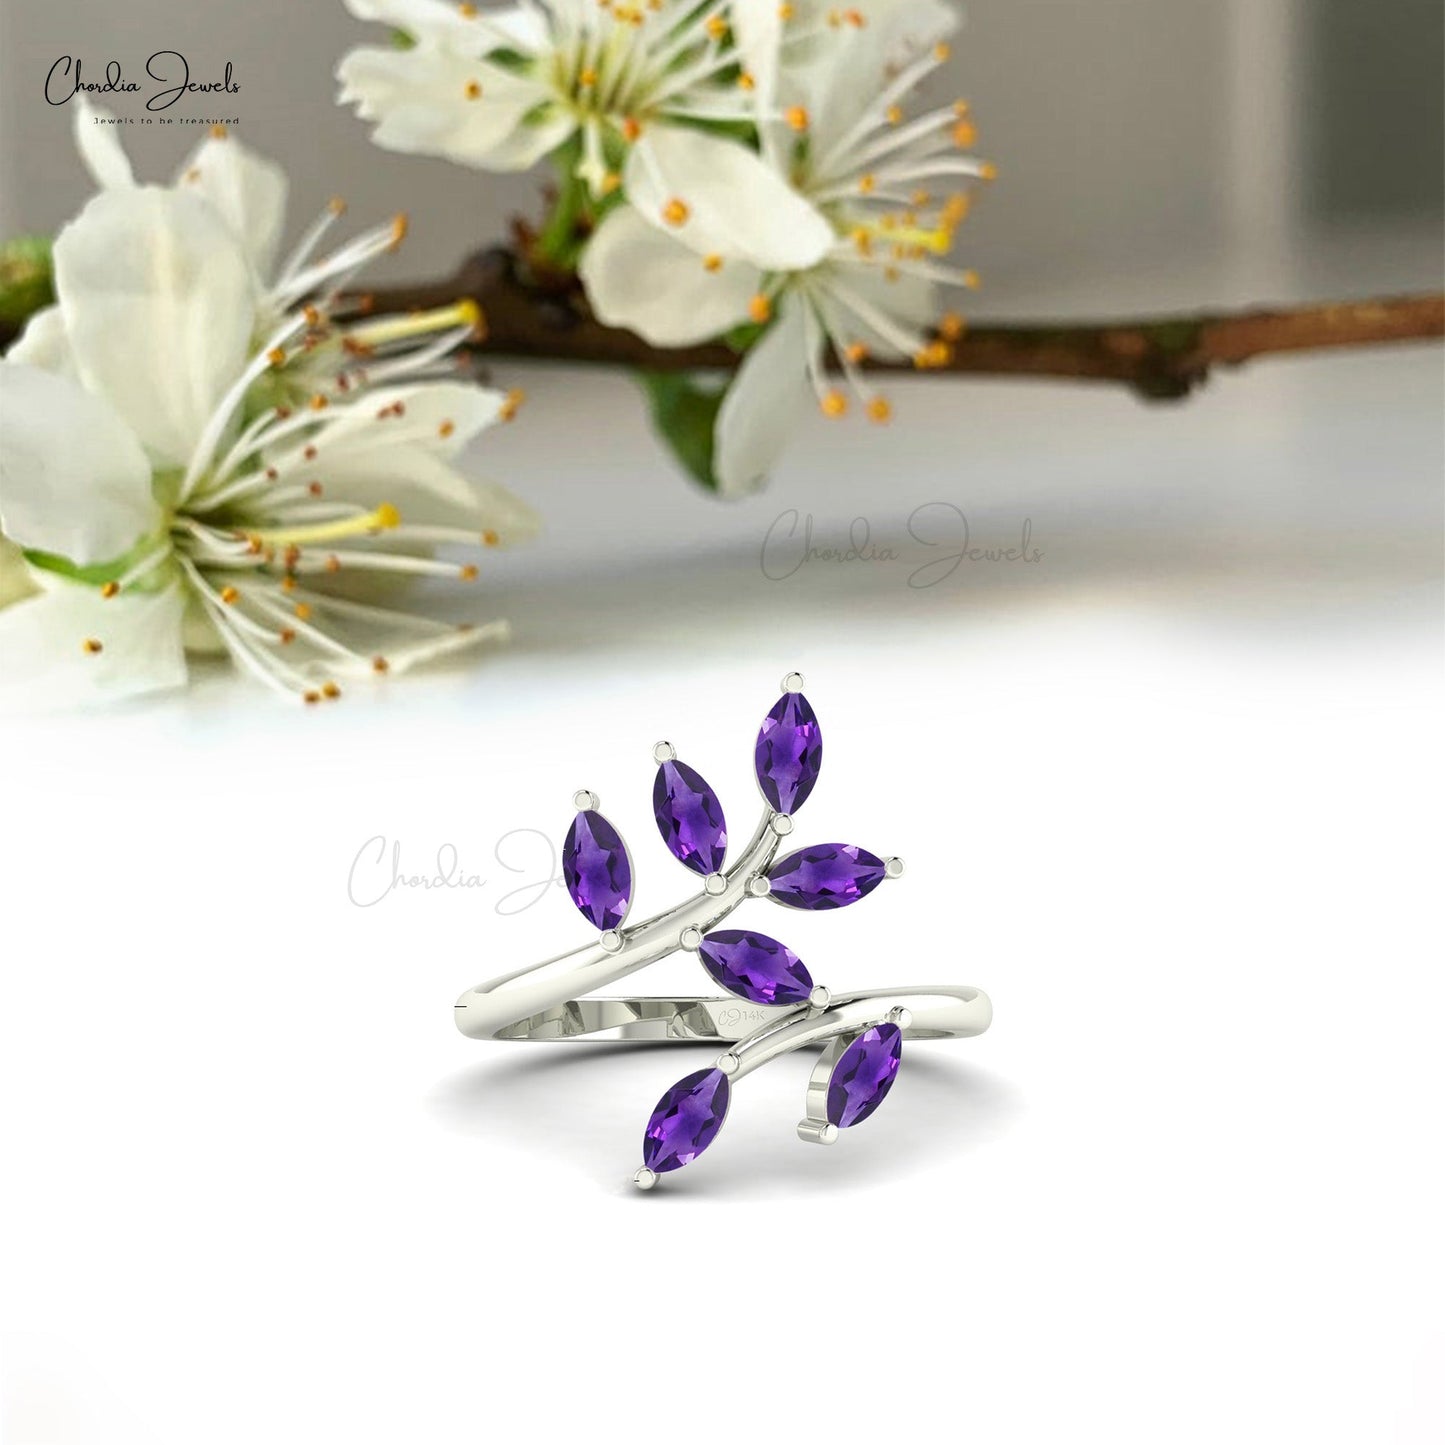 Natural Amethyst Gemstone Prong Set Ring 14k Solid Gold Leafy Open Band Anniversary Ring